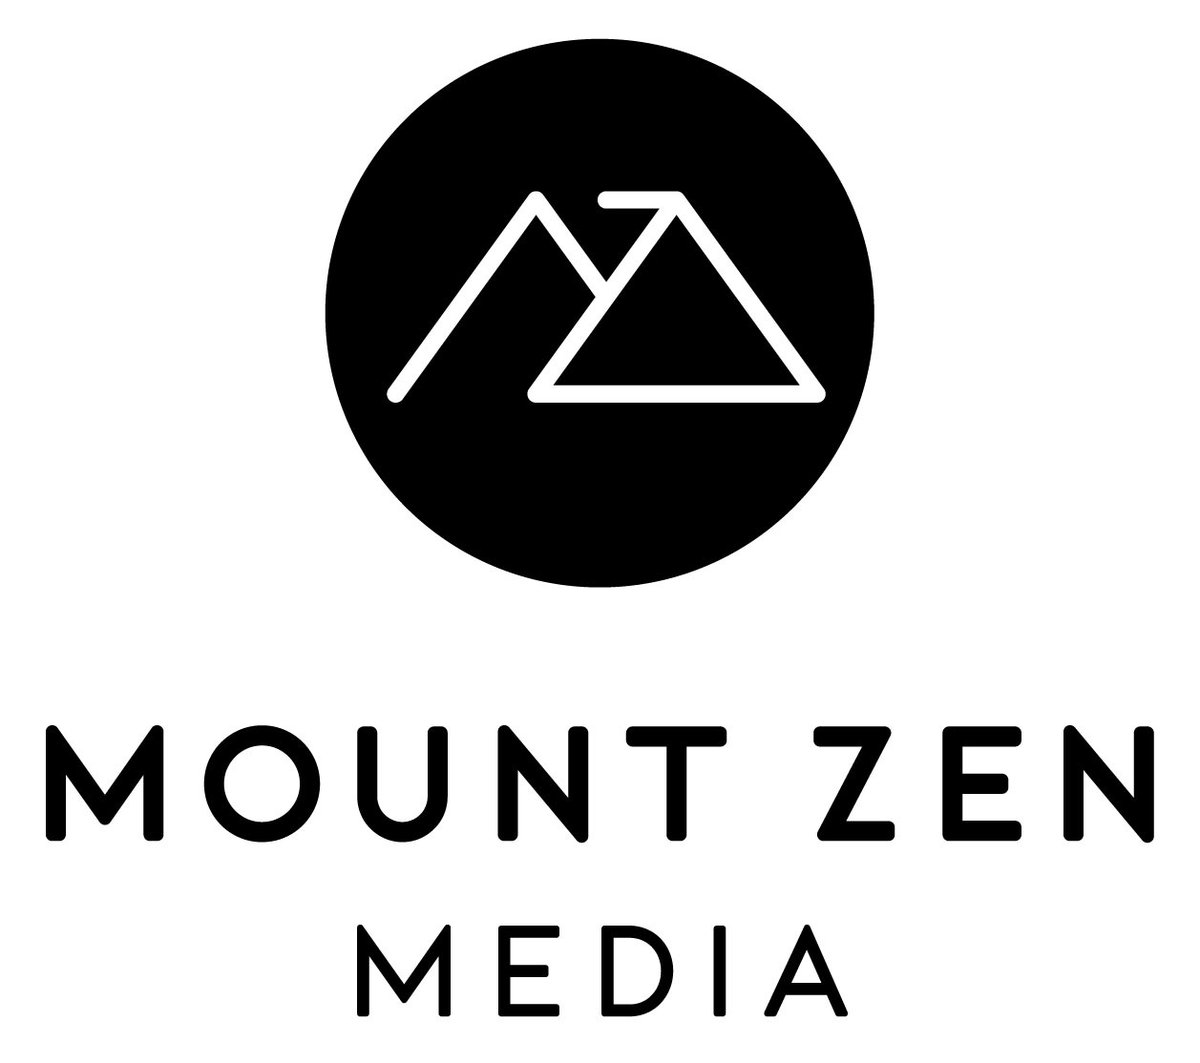 Actor @AftabShivdasani & his wife @Nindusanj announced their production company, @MountZenMedia to create content ranging from films, online shows & documentaries.